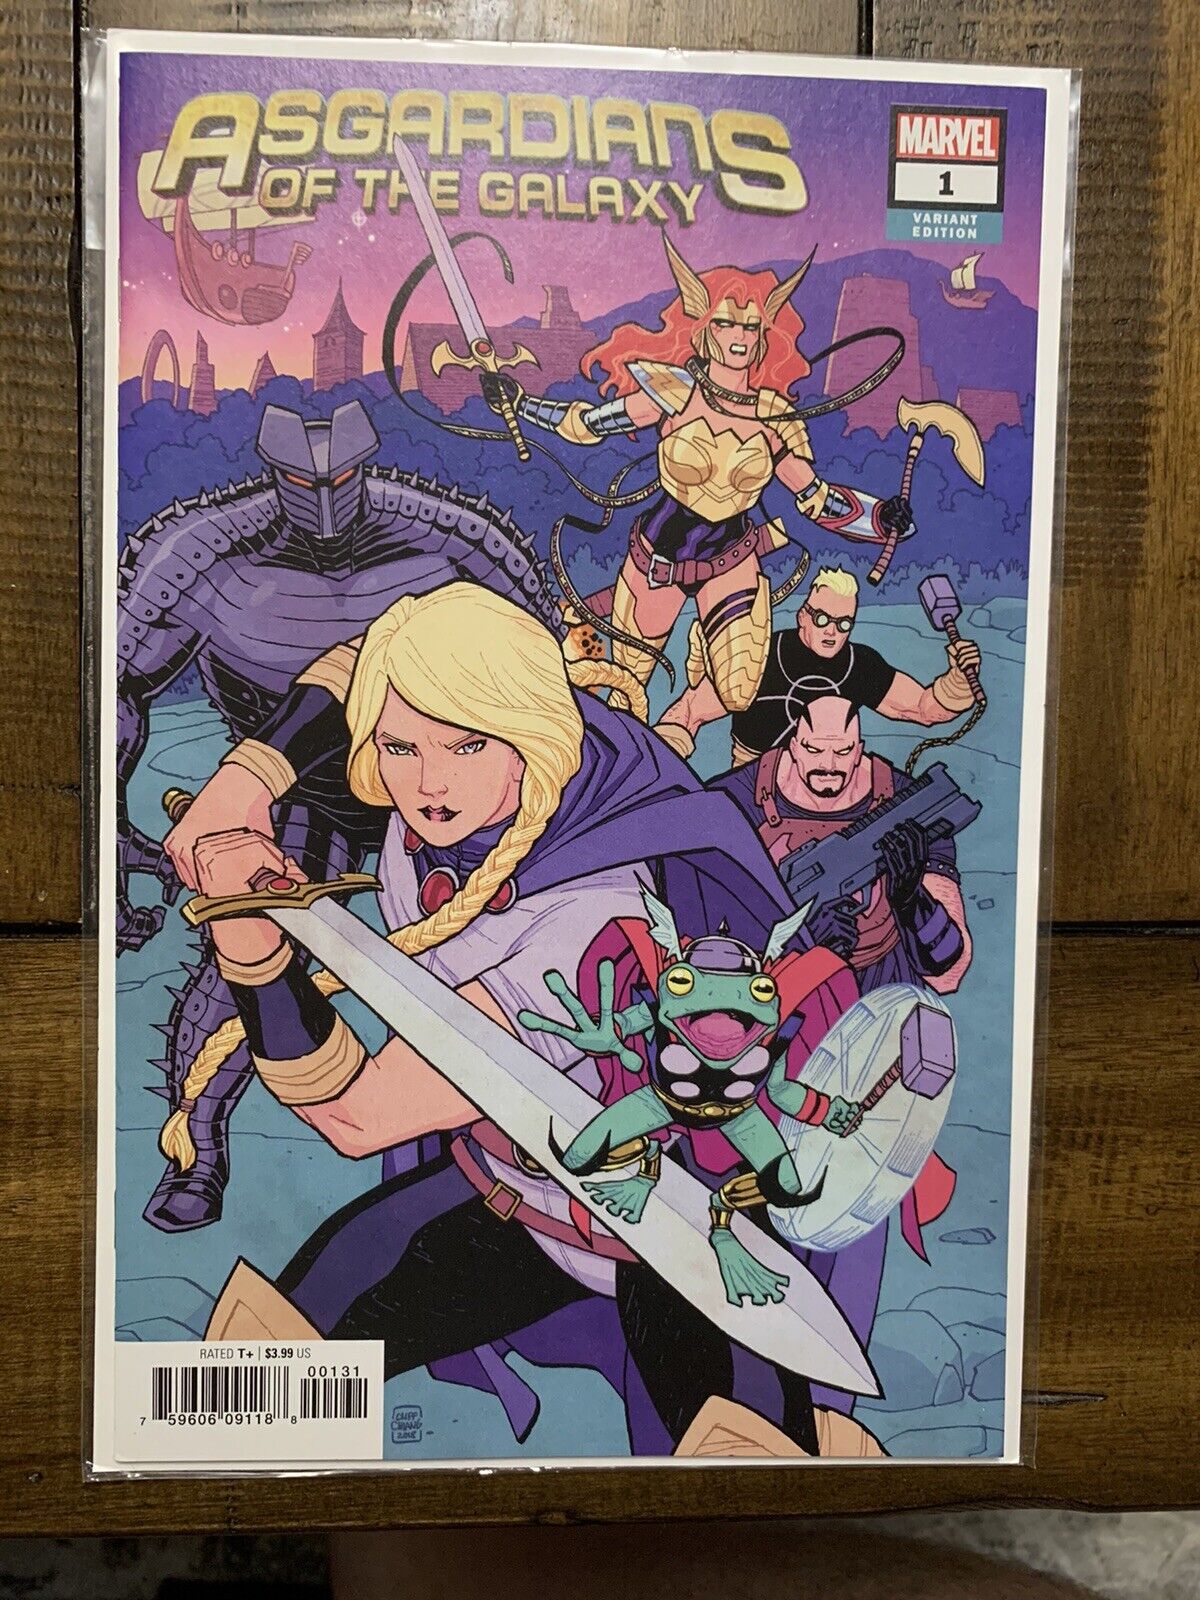 Marvel Comics ASGARDIANS OF THE GALAXY #1 CHIANG 1:50 Variant Cover NM/NM+